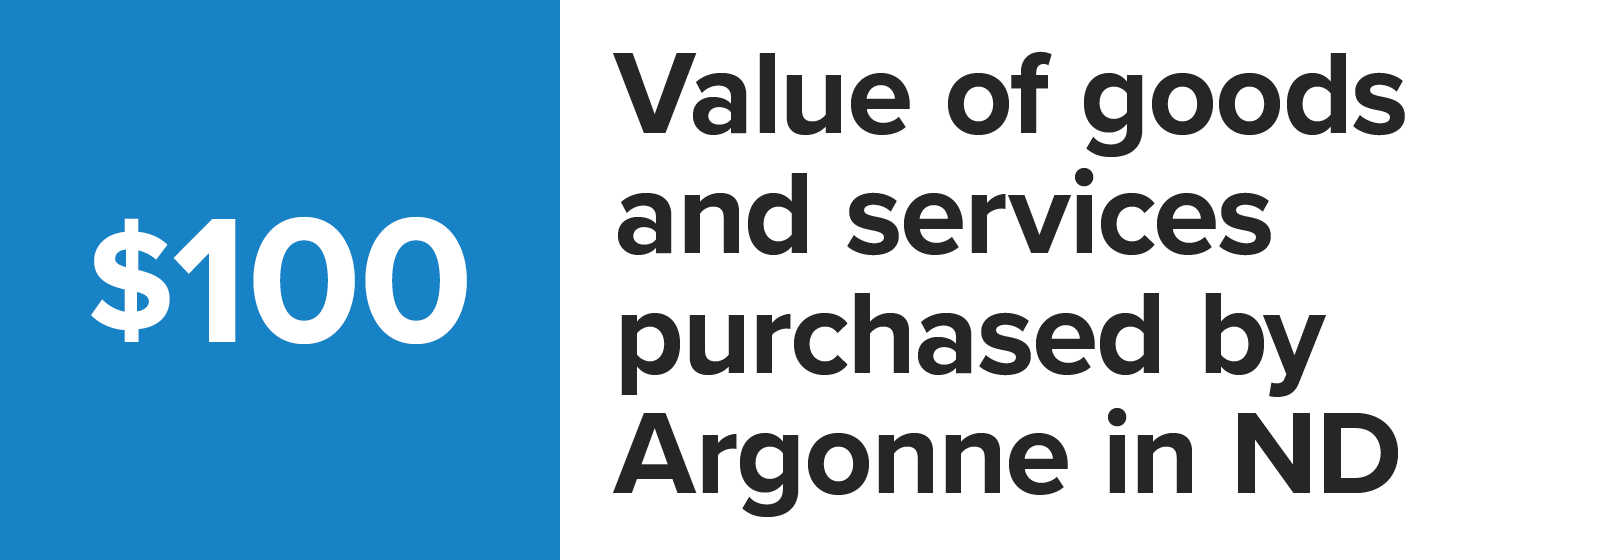 Number graphic value of goods and services purchased by Argonne in North Dakota